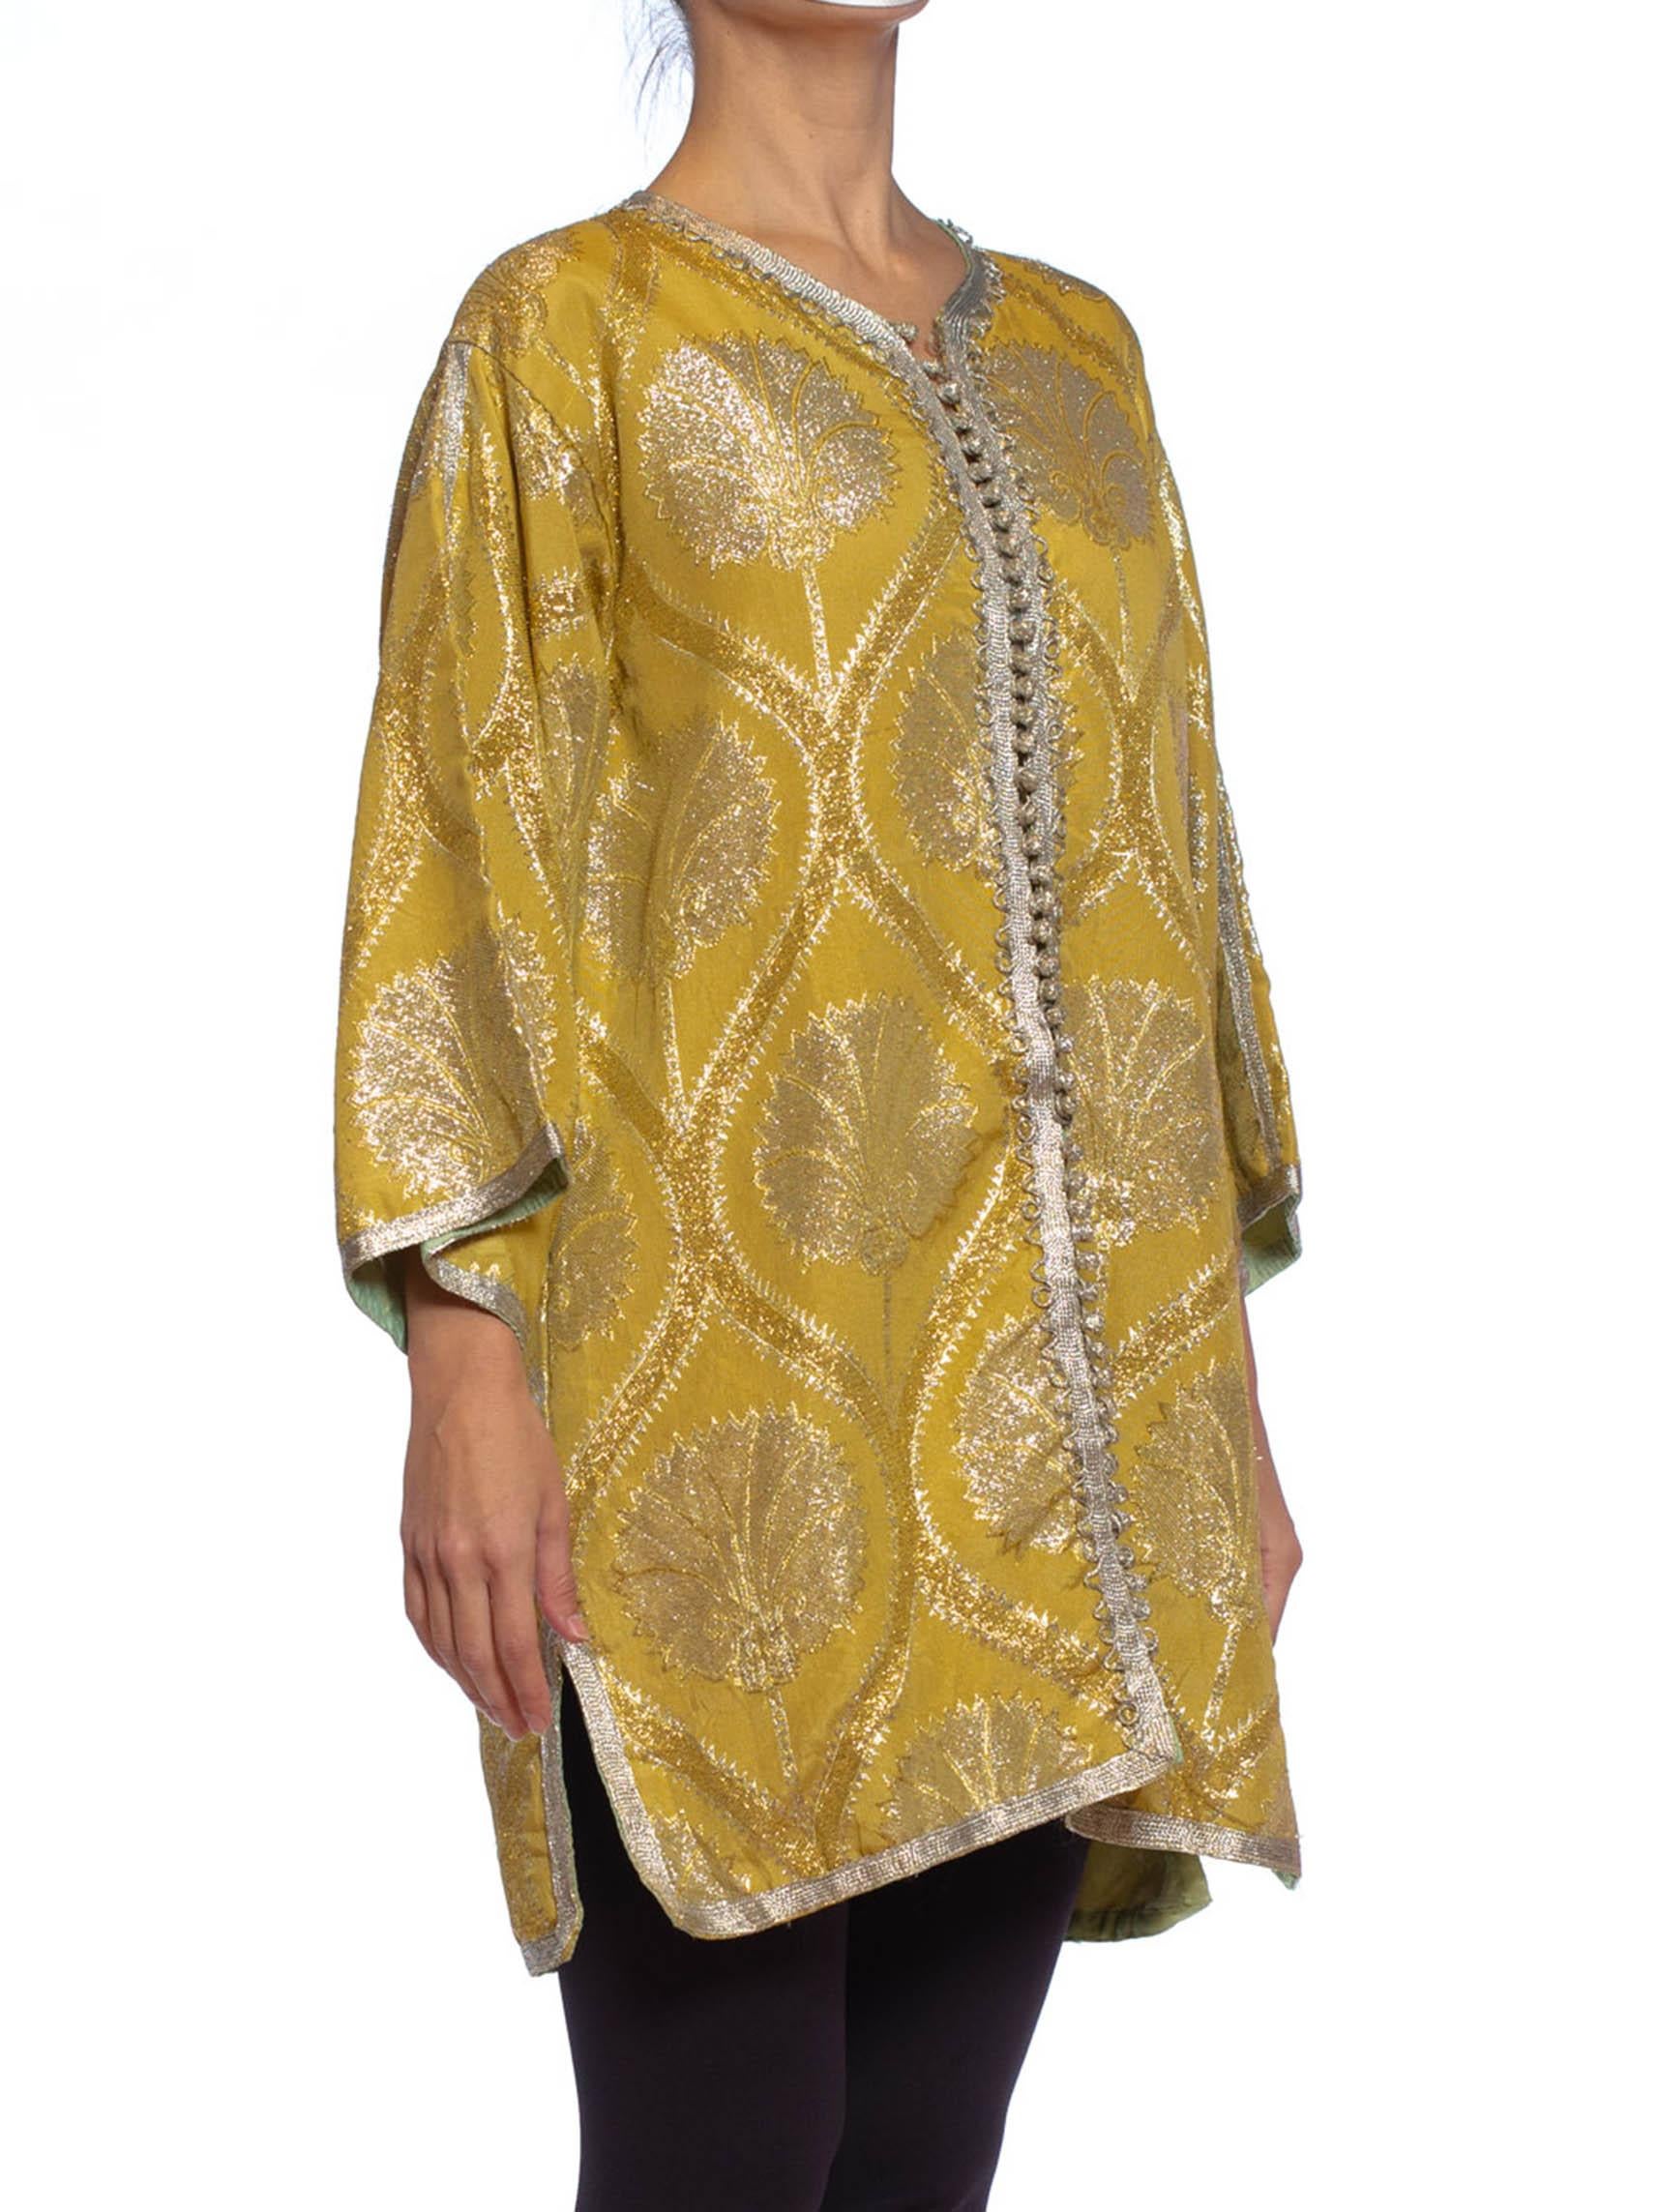 Women's or Men's 1960S Gold & Silver Metallic Rayon Lurex Damask Kaftan Tunic Jacket With Hand S For Sale